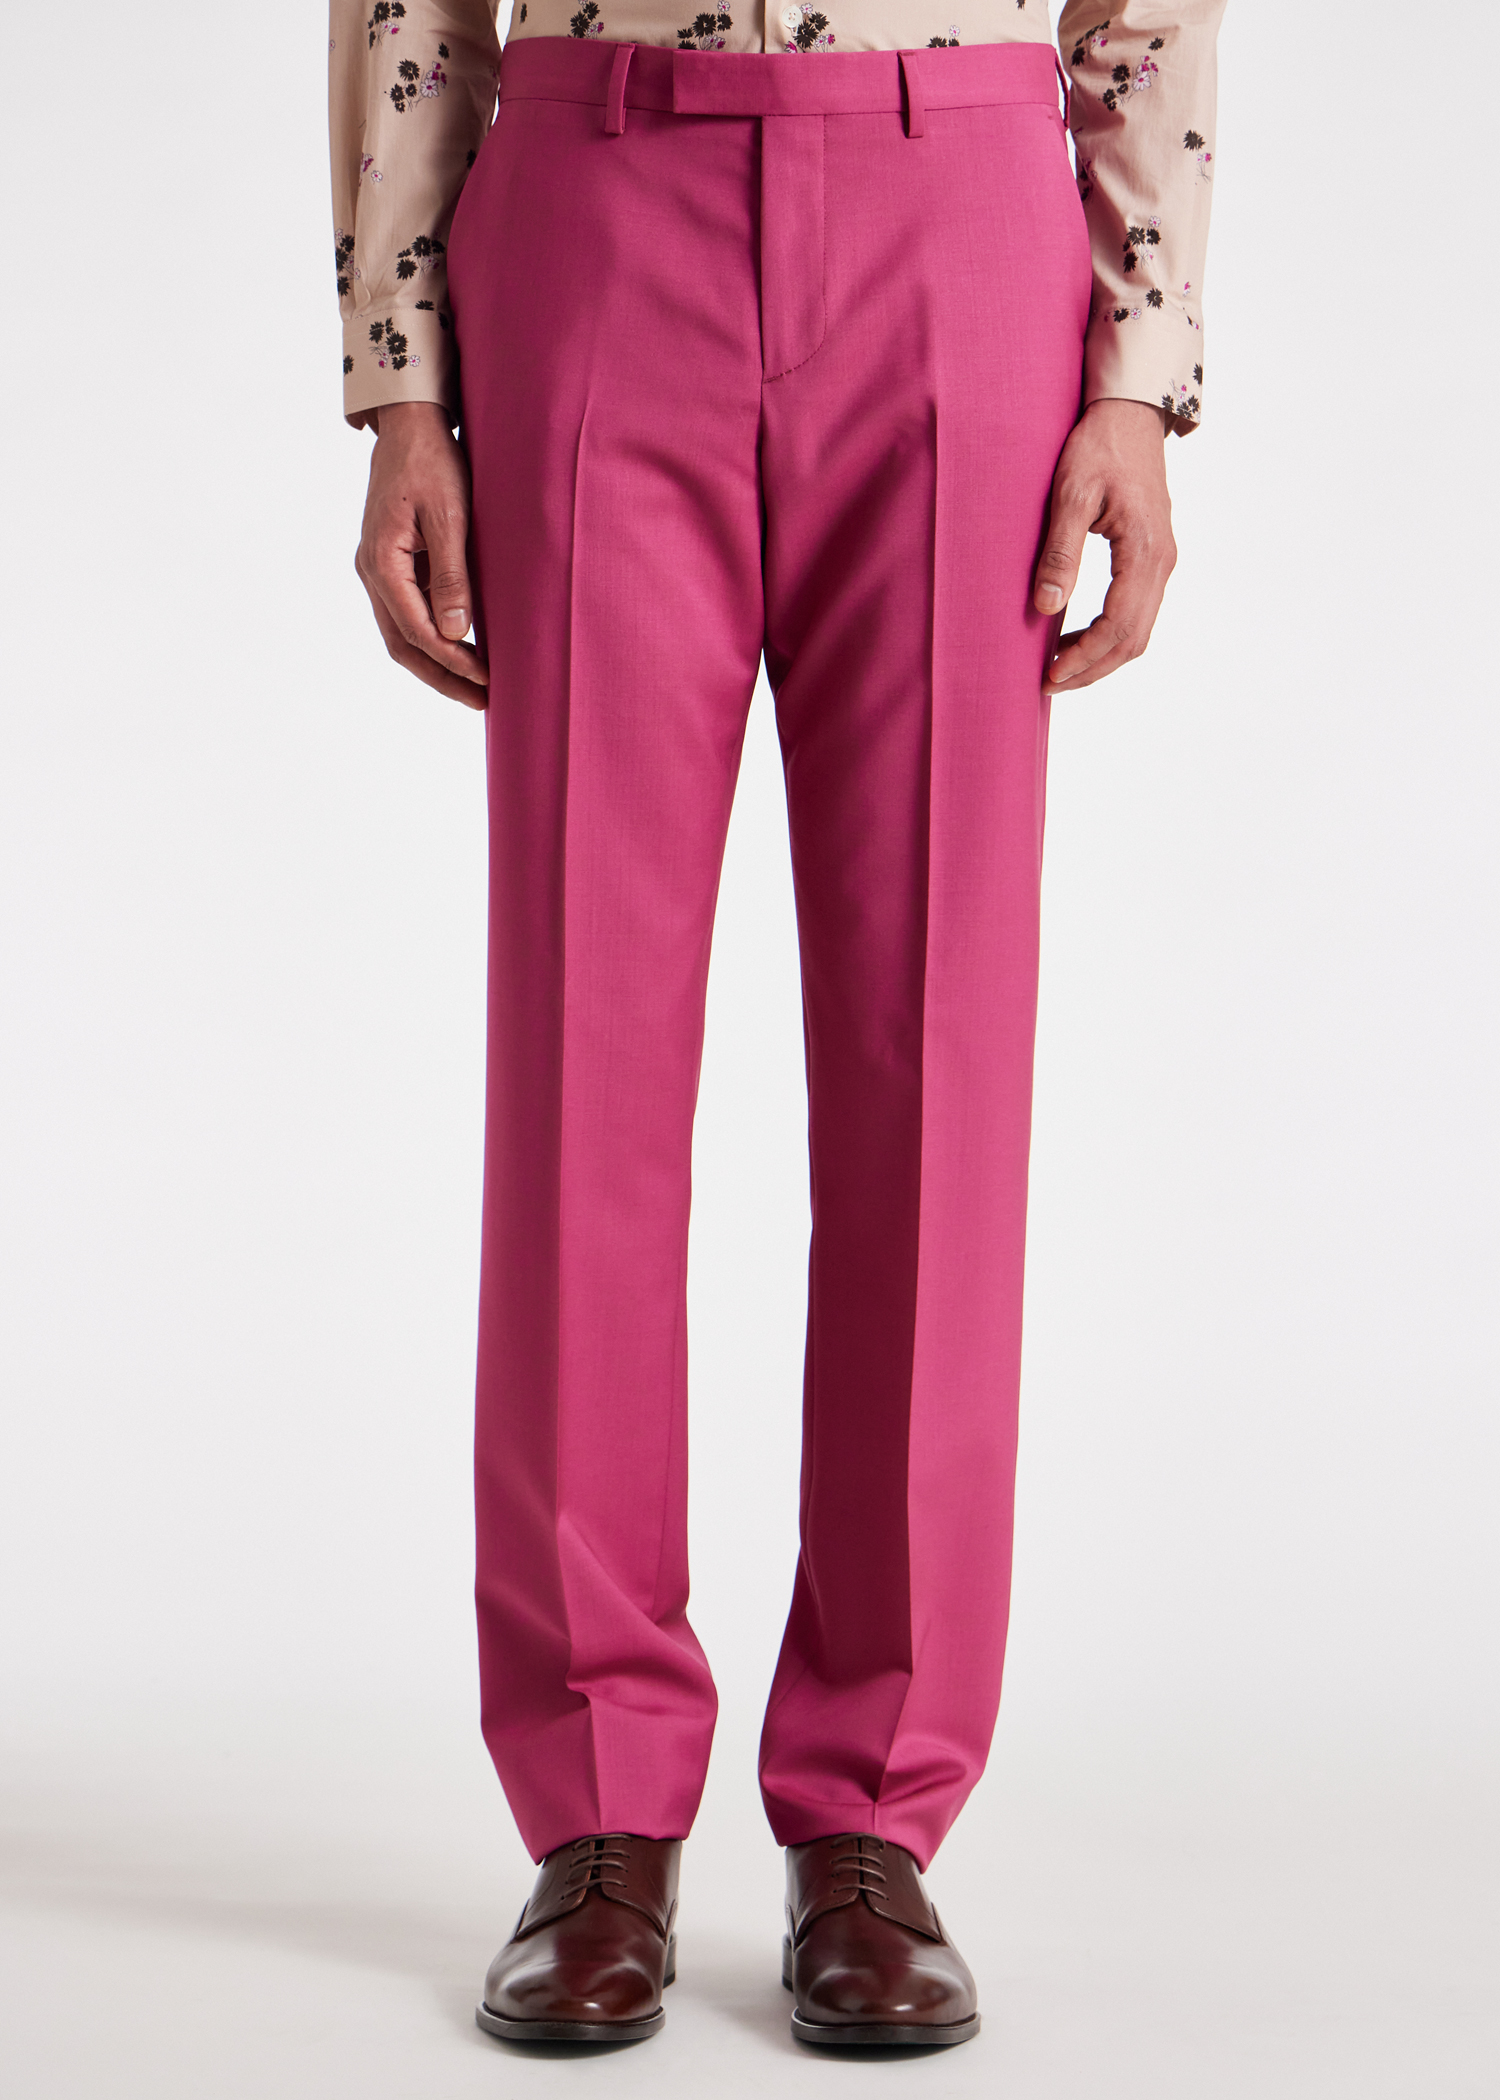 Express Men, Classic Pink Ponte Knit Suit Pant in Iced Mauve